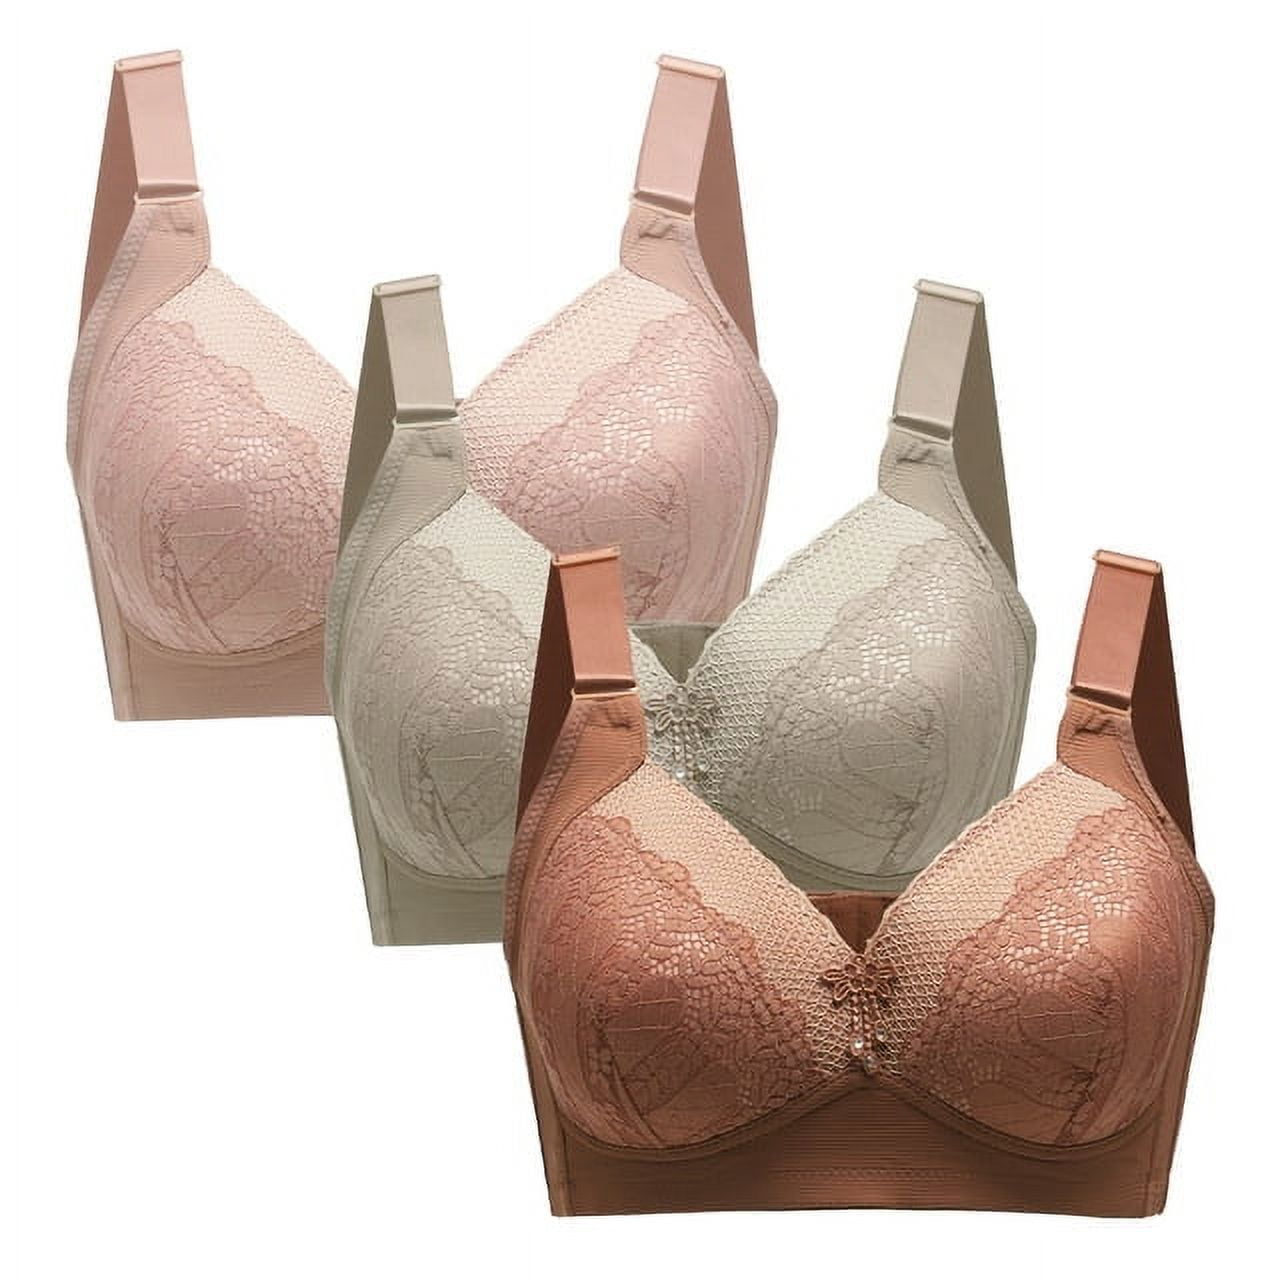 H Cup Bras in Sizes 28-58 H  Underwire and Wire Free Bras